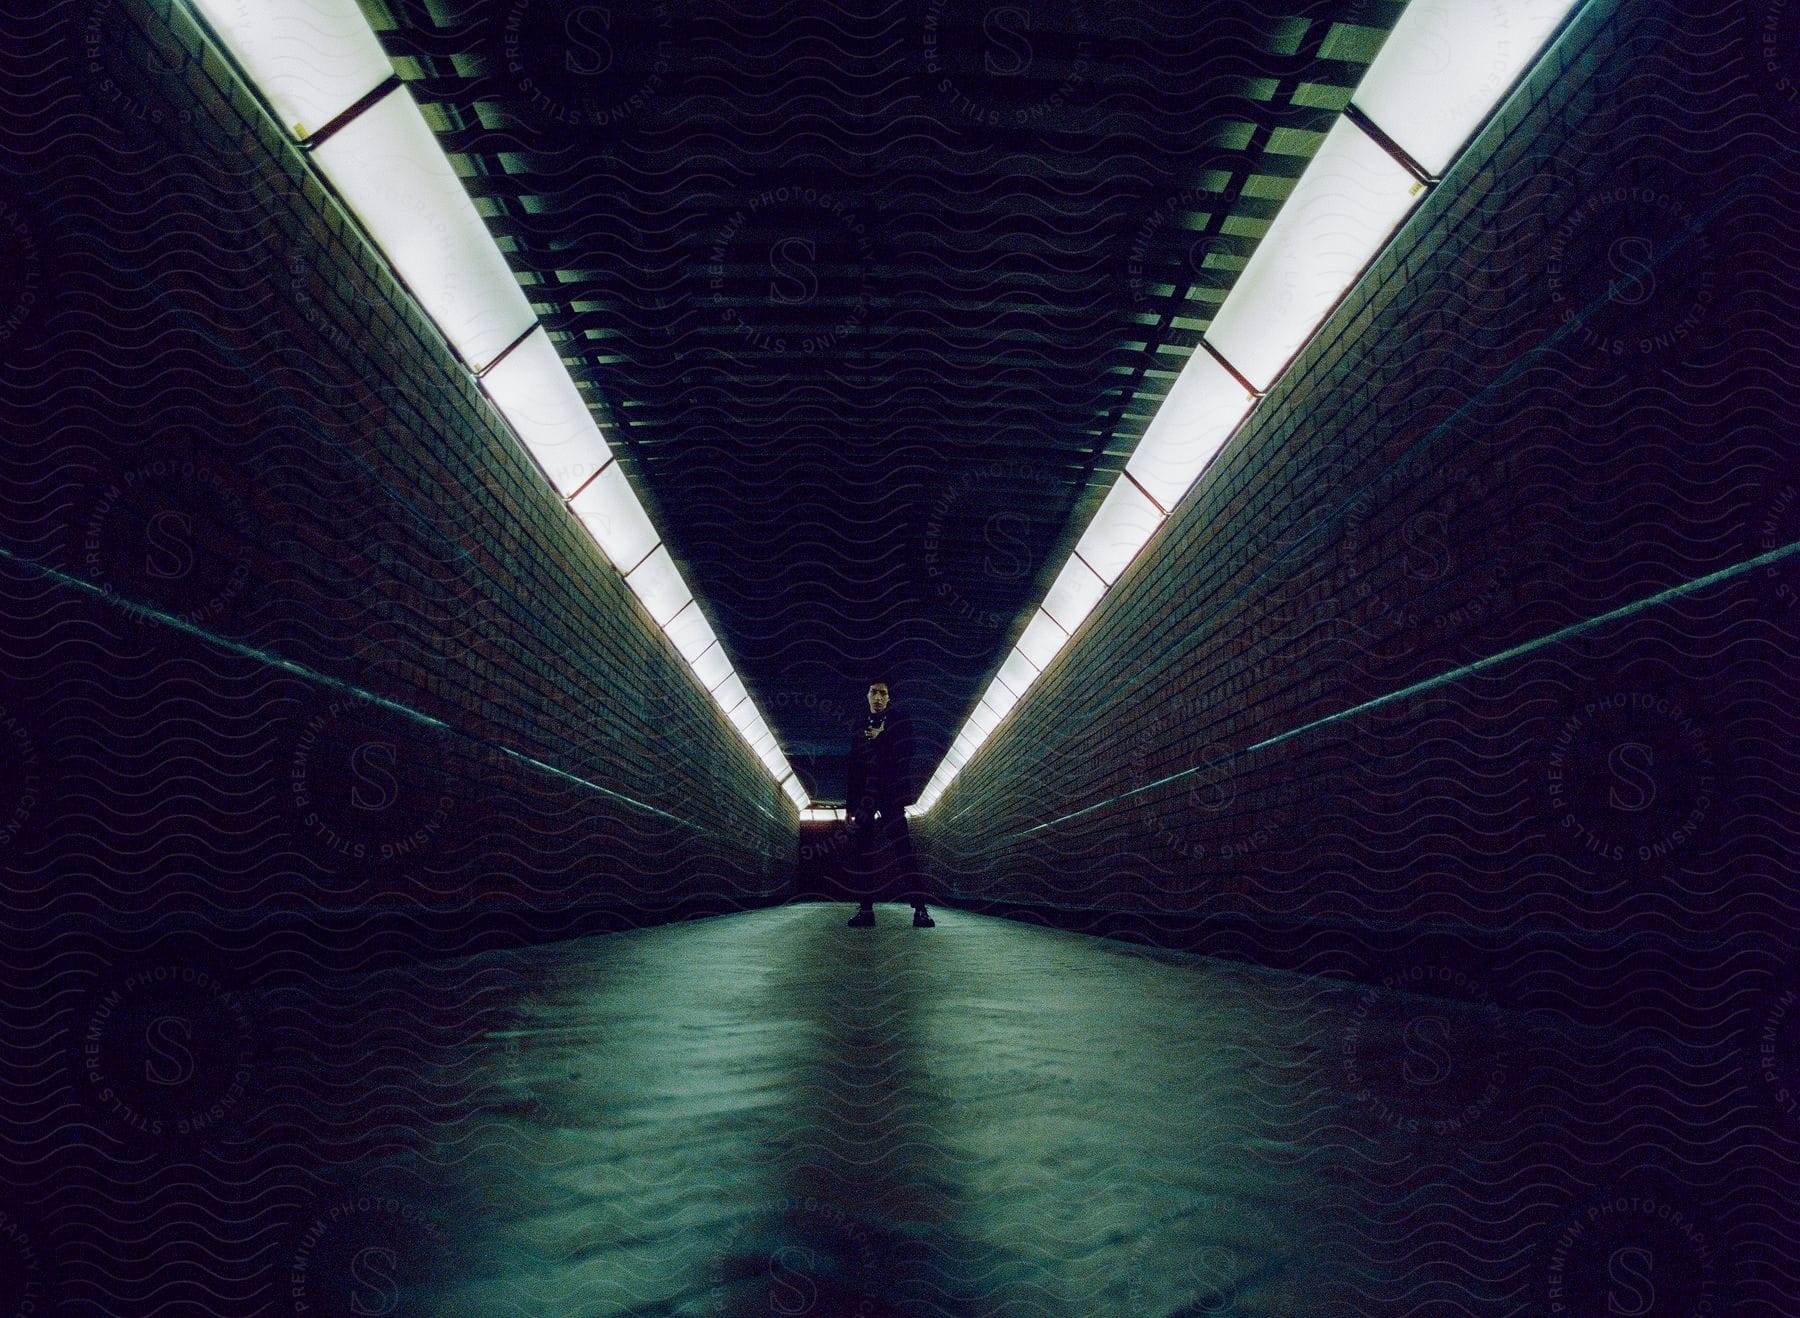 Man standing at the end of a dimly lit tunnel with fluorescent lights and brick walls.